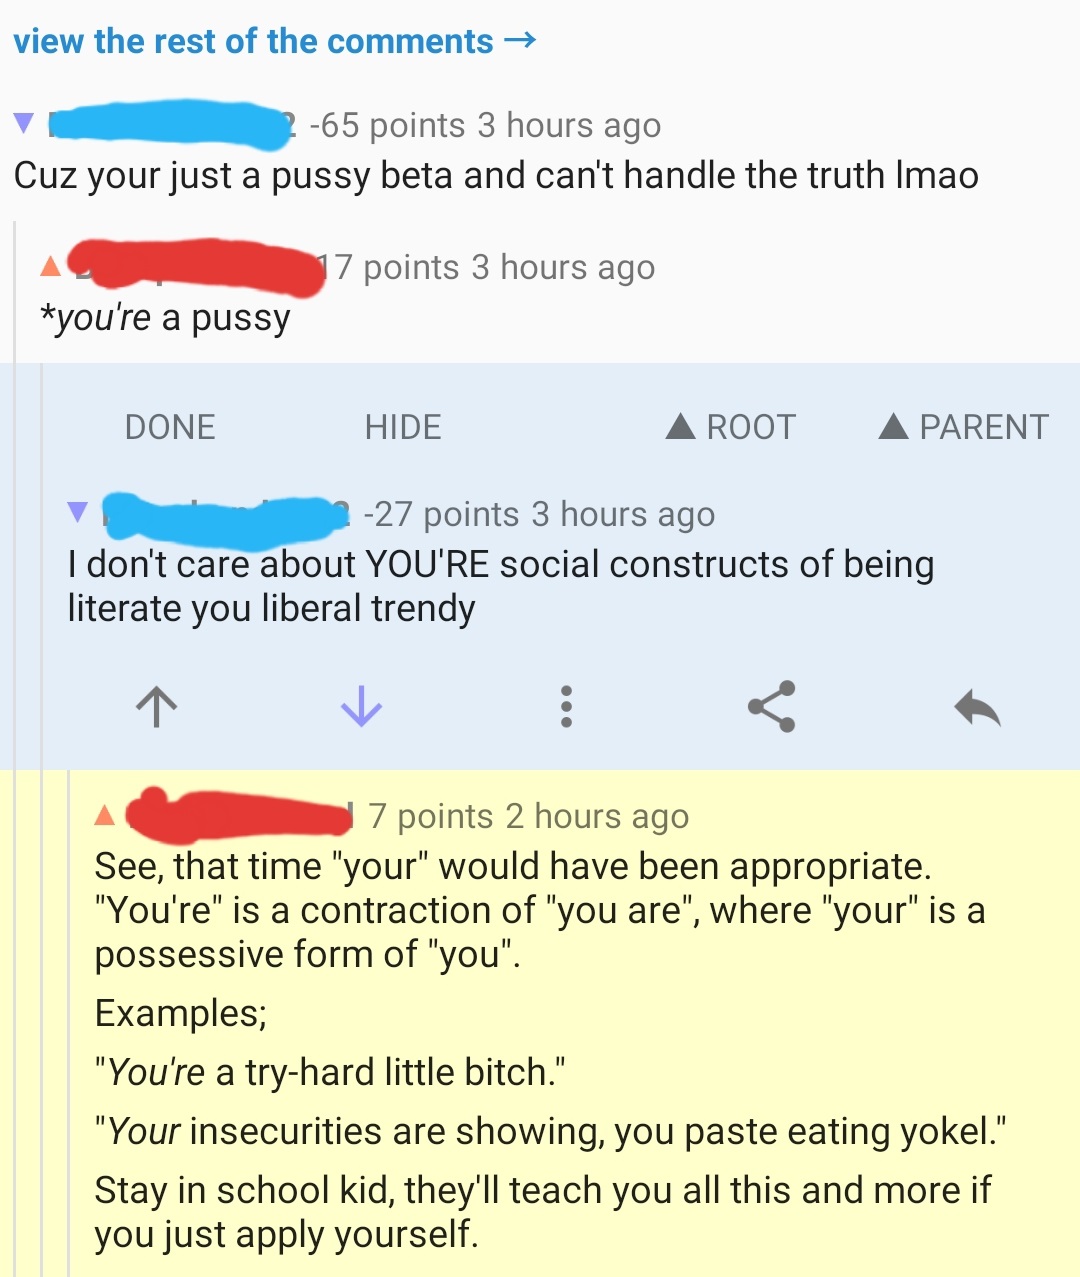 Cuz your just a pussy beta and can't handle the truth Imao 17 points 3 hours ago you're a pussy Done Hide A Root A Parent 27 points 3 hours ago I don't care about You'Re social constructs of being lite